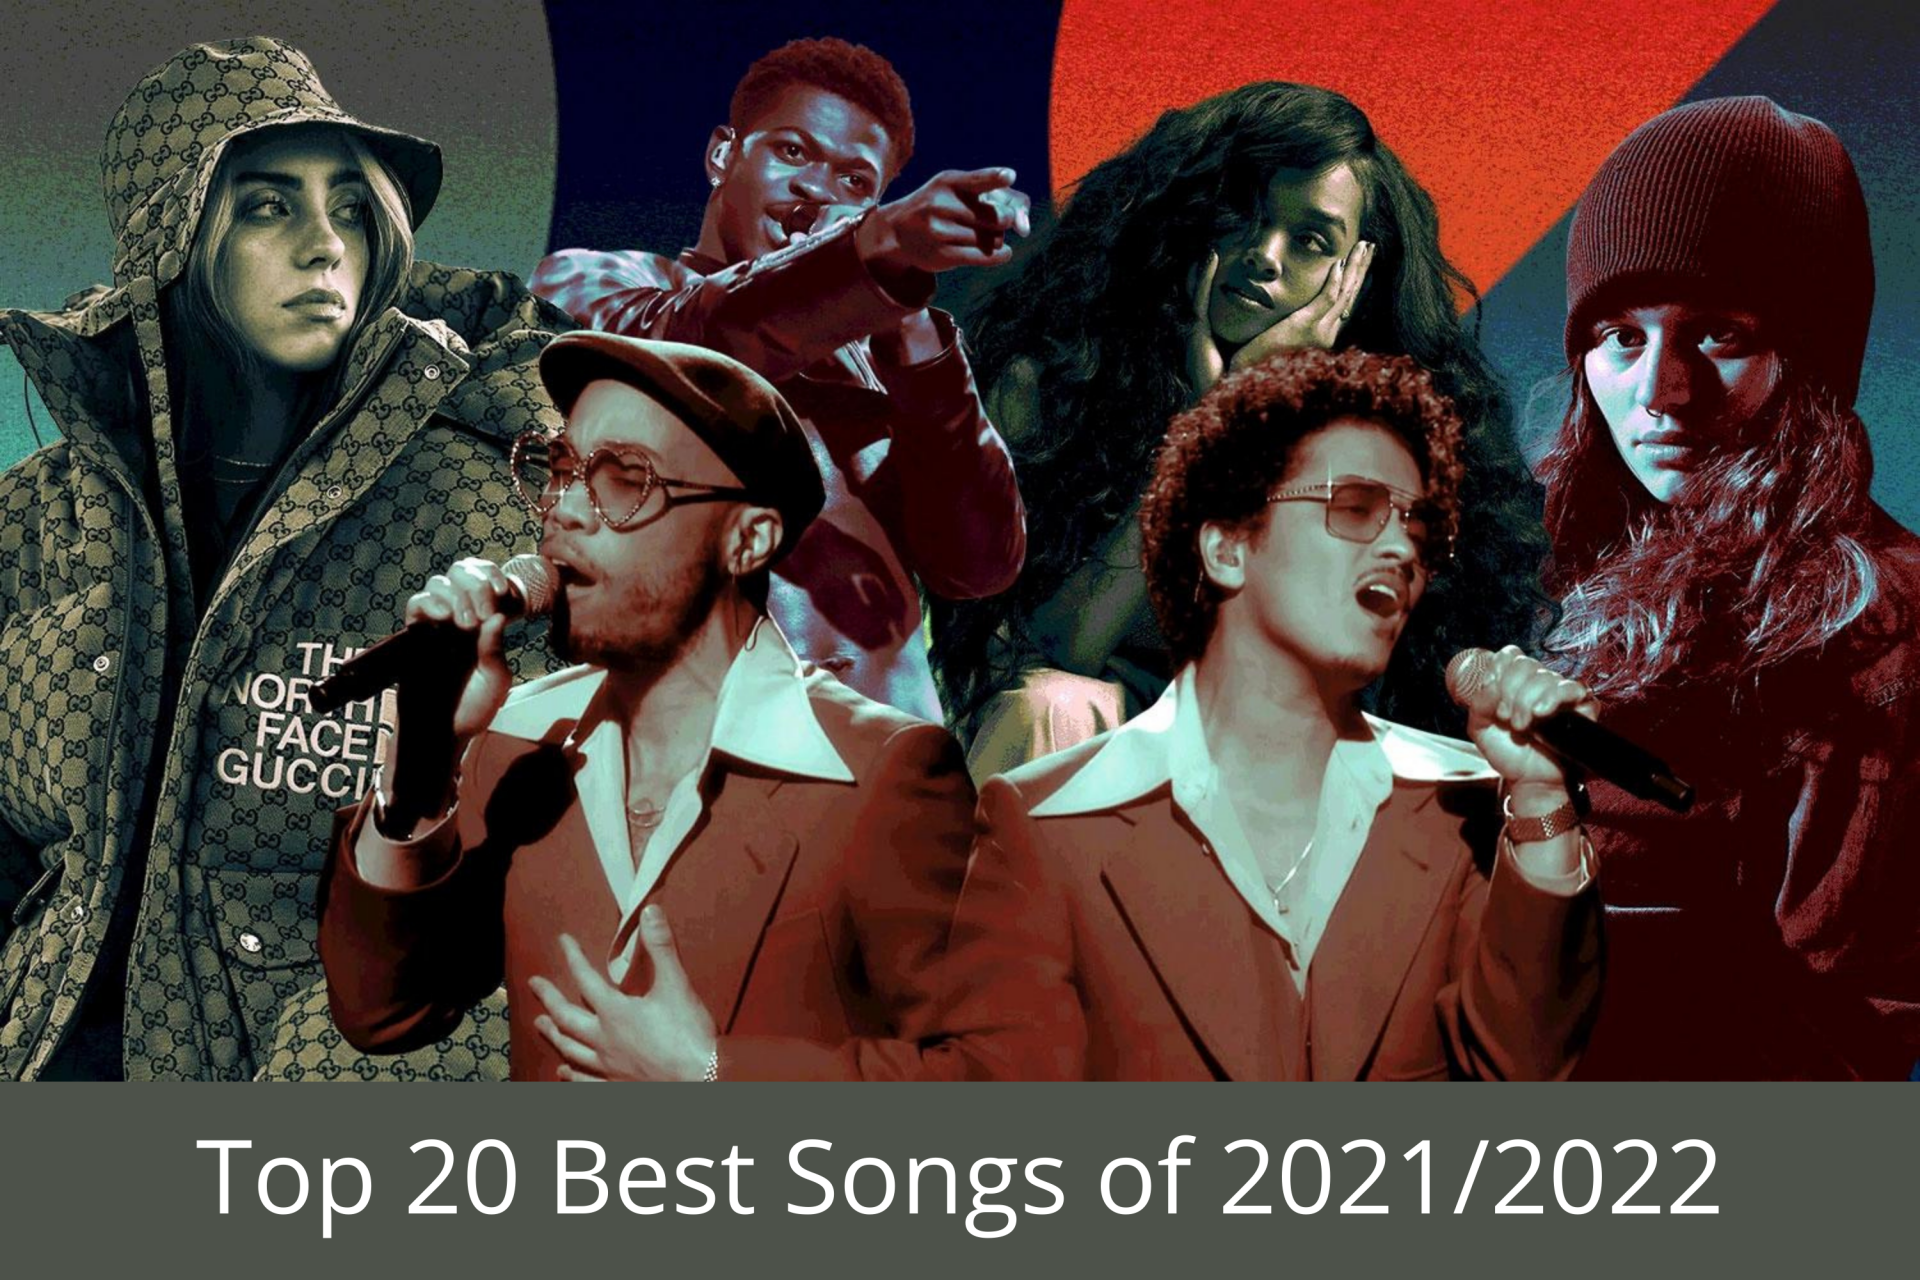 Top 20 Best & Greatest Songs in the World 2021/2022